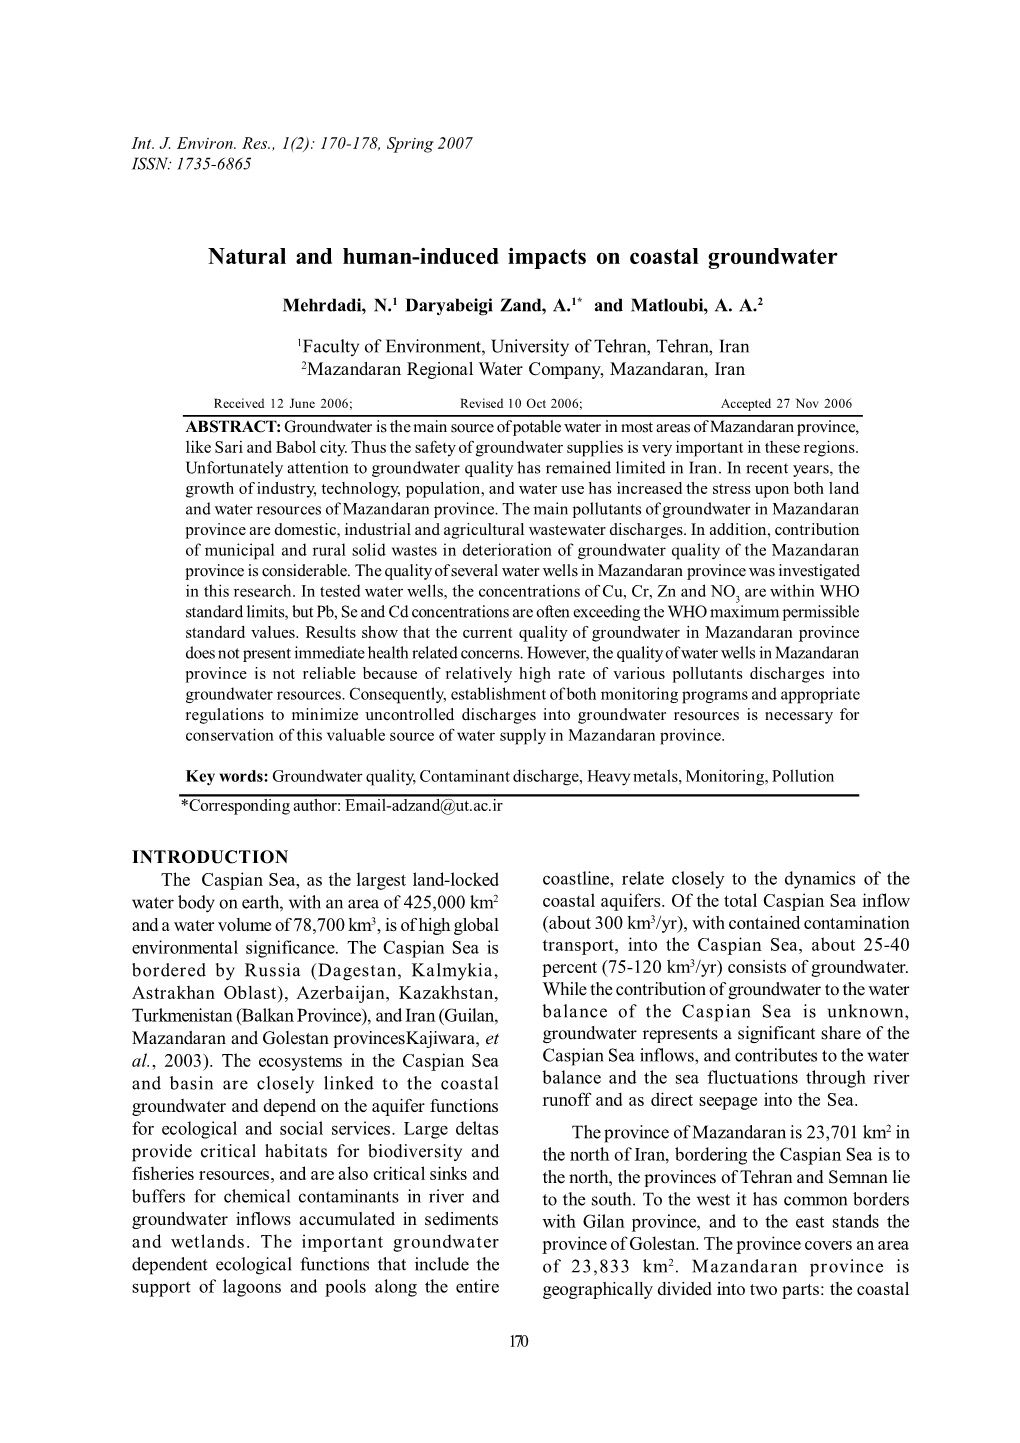 Natural and Human-Induced Impacts on Coastal Groundwater